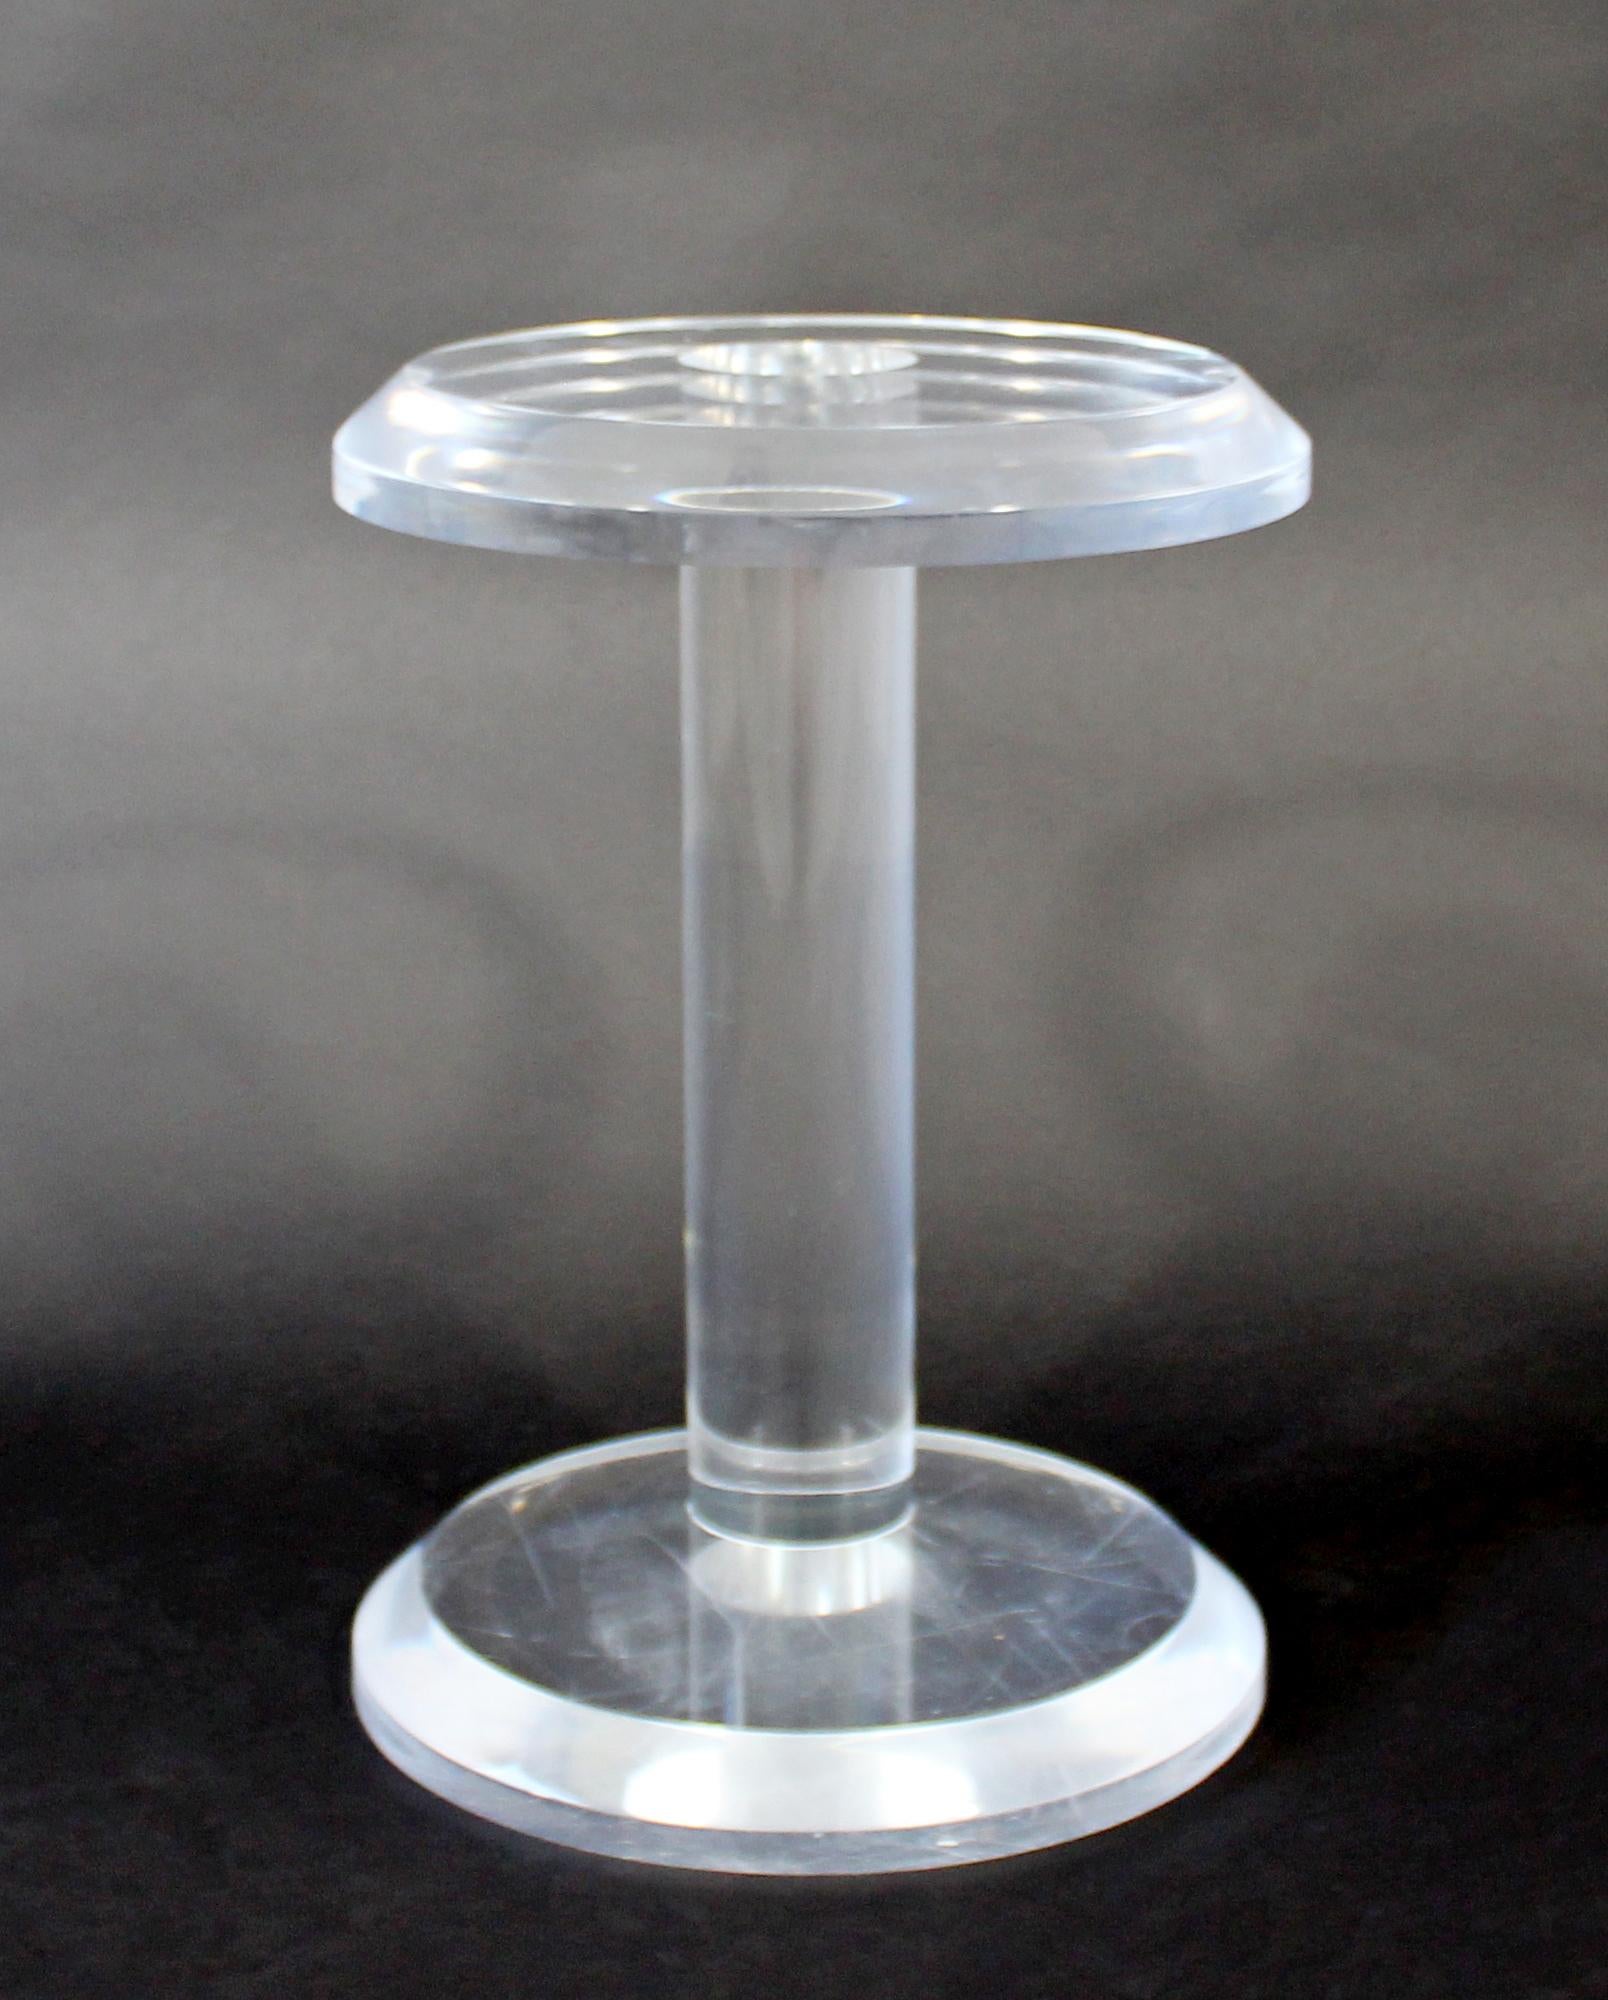 For your consideration is a Minimalist, small and round, Lucite or acrylic side or end table, circa the 1970s. In very good vintage condition. The dimensions are 12